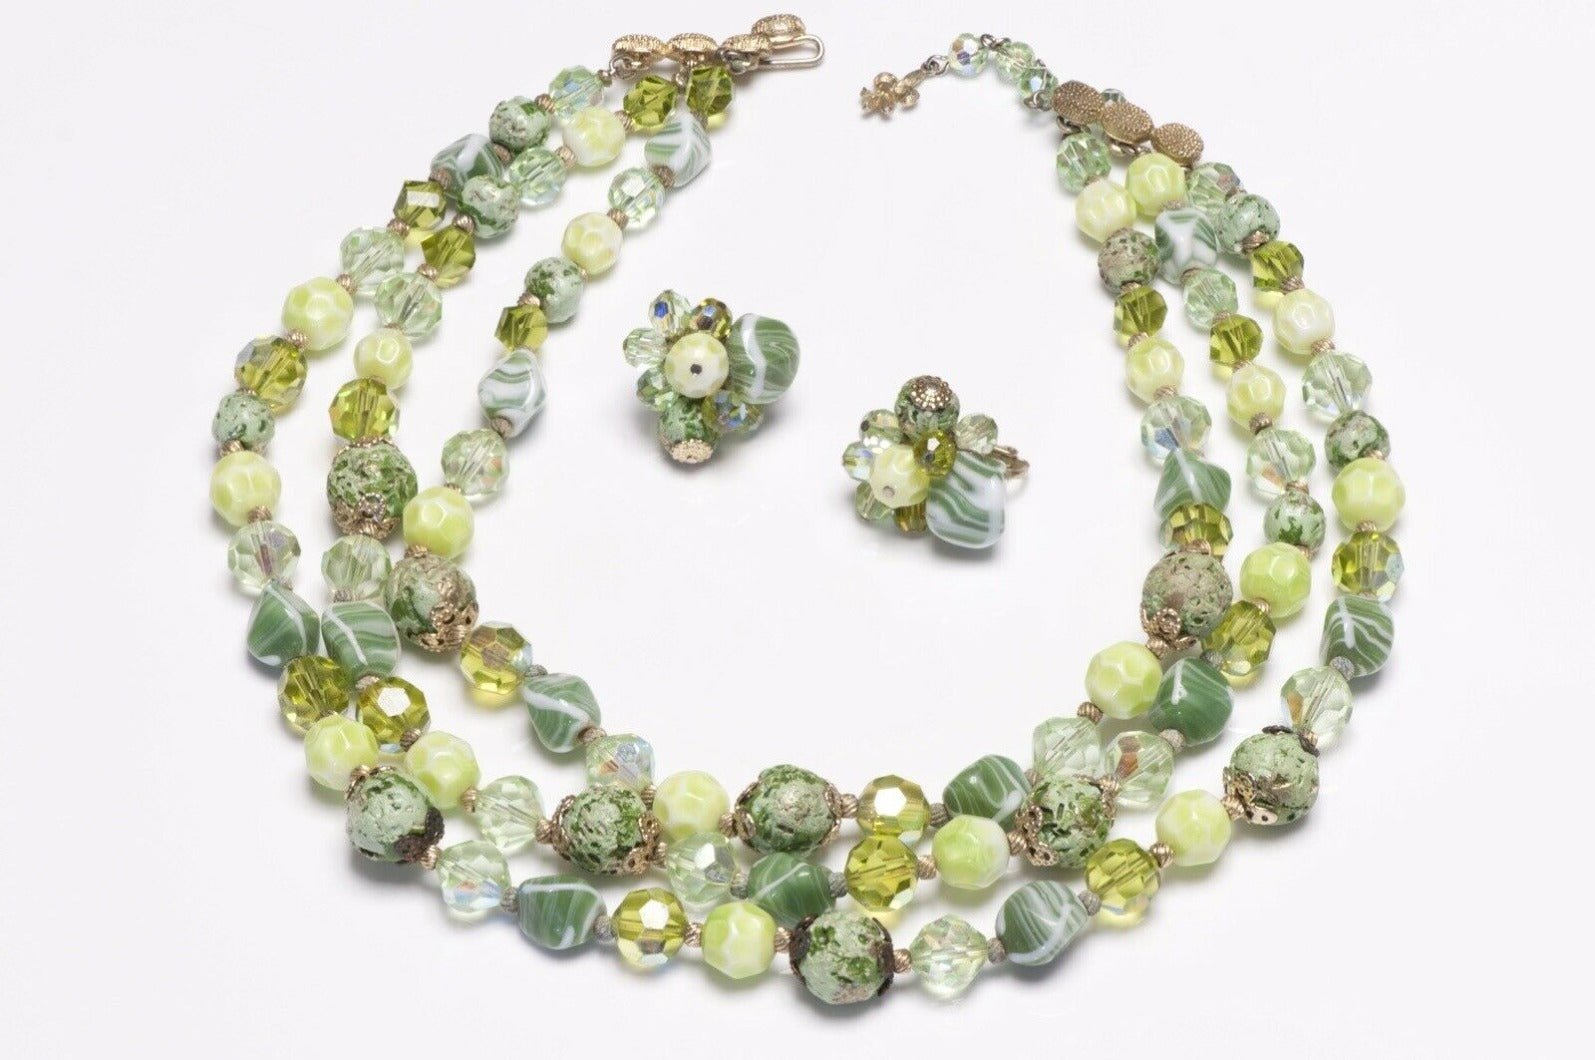 Vintage 1950’s Vendome Green Crystal Glass Beads Necklace Earrings Set